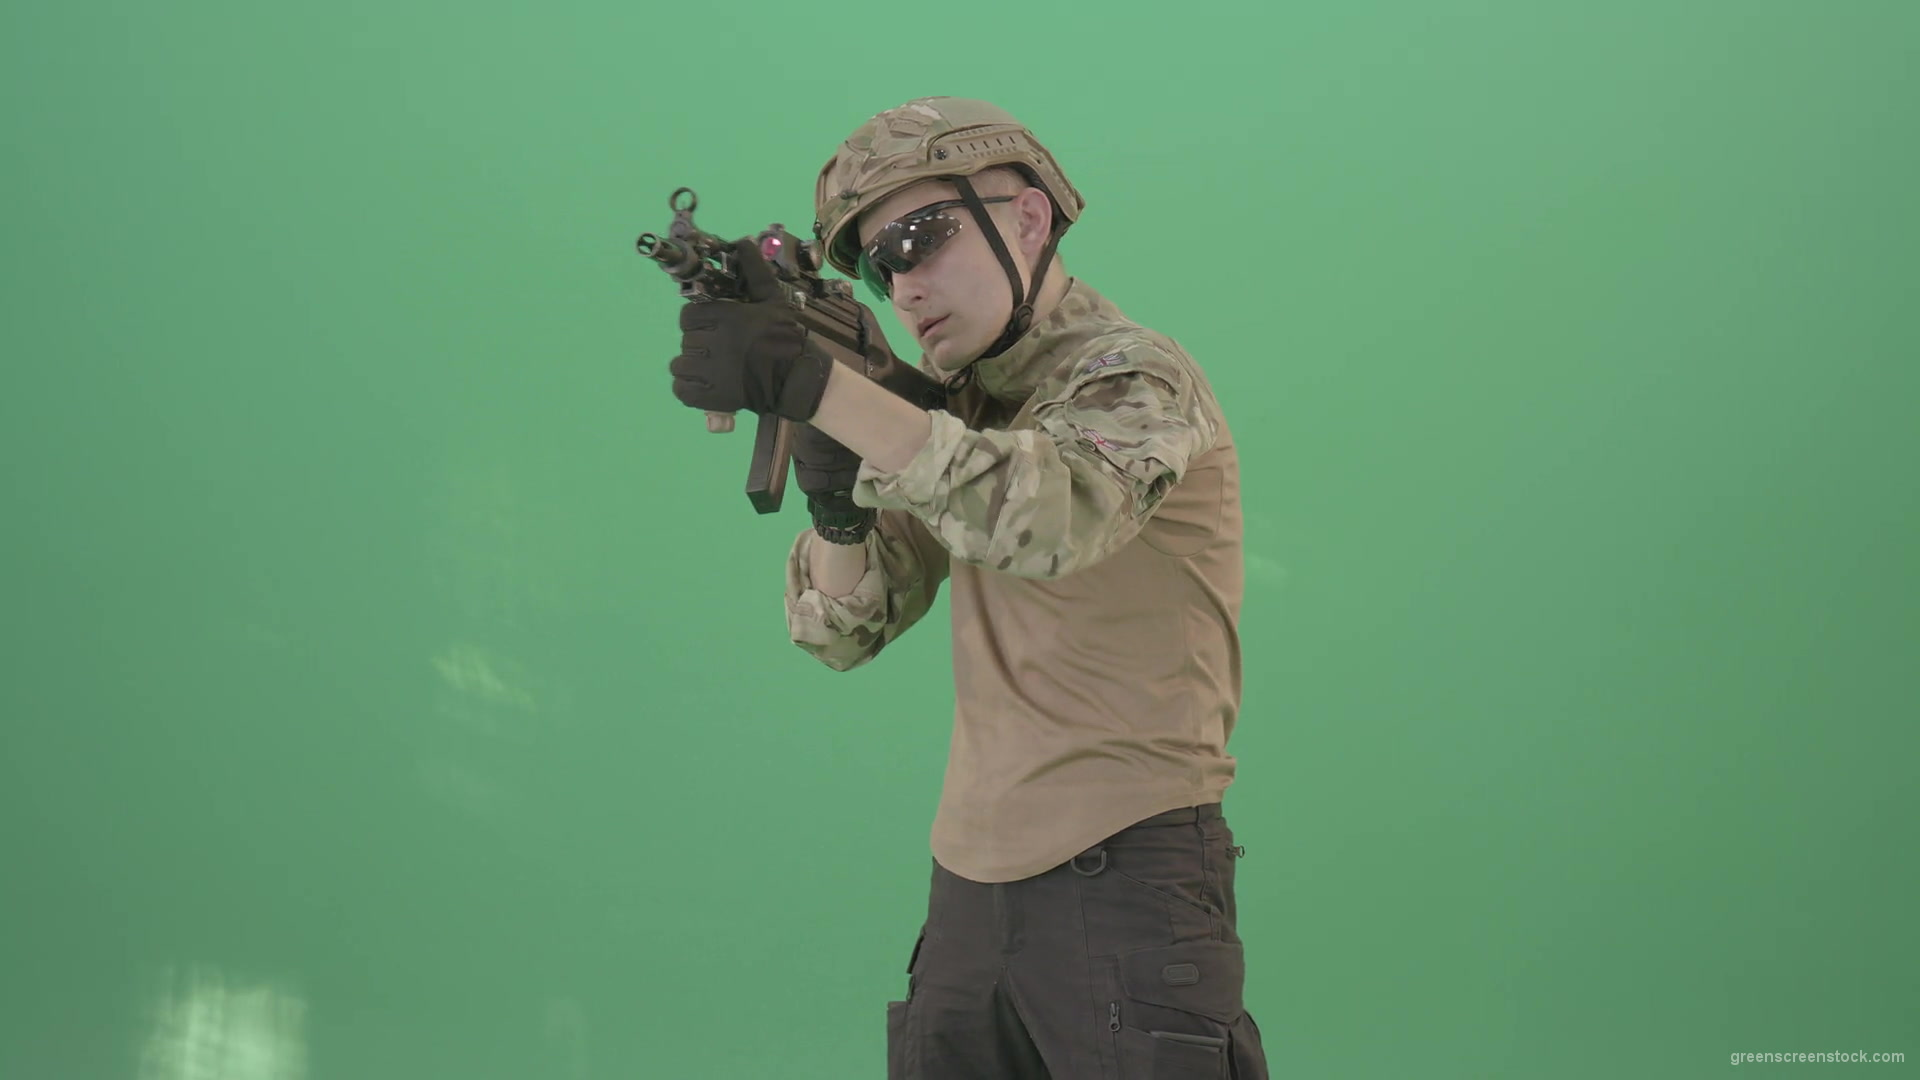 Soldier-in-army-uniform-shooting-with-gun-fire-machine-isolated-on-green-screen-4K-Video-Footage-1920_004 Green Screen Stock